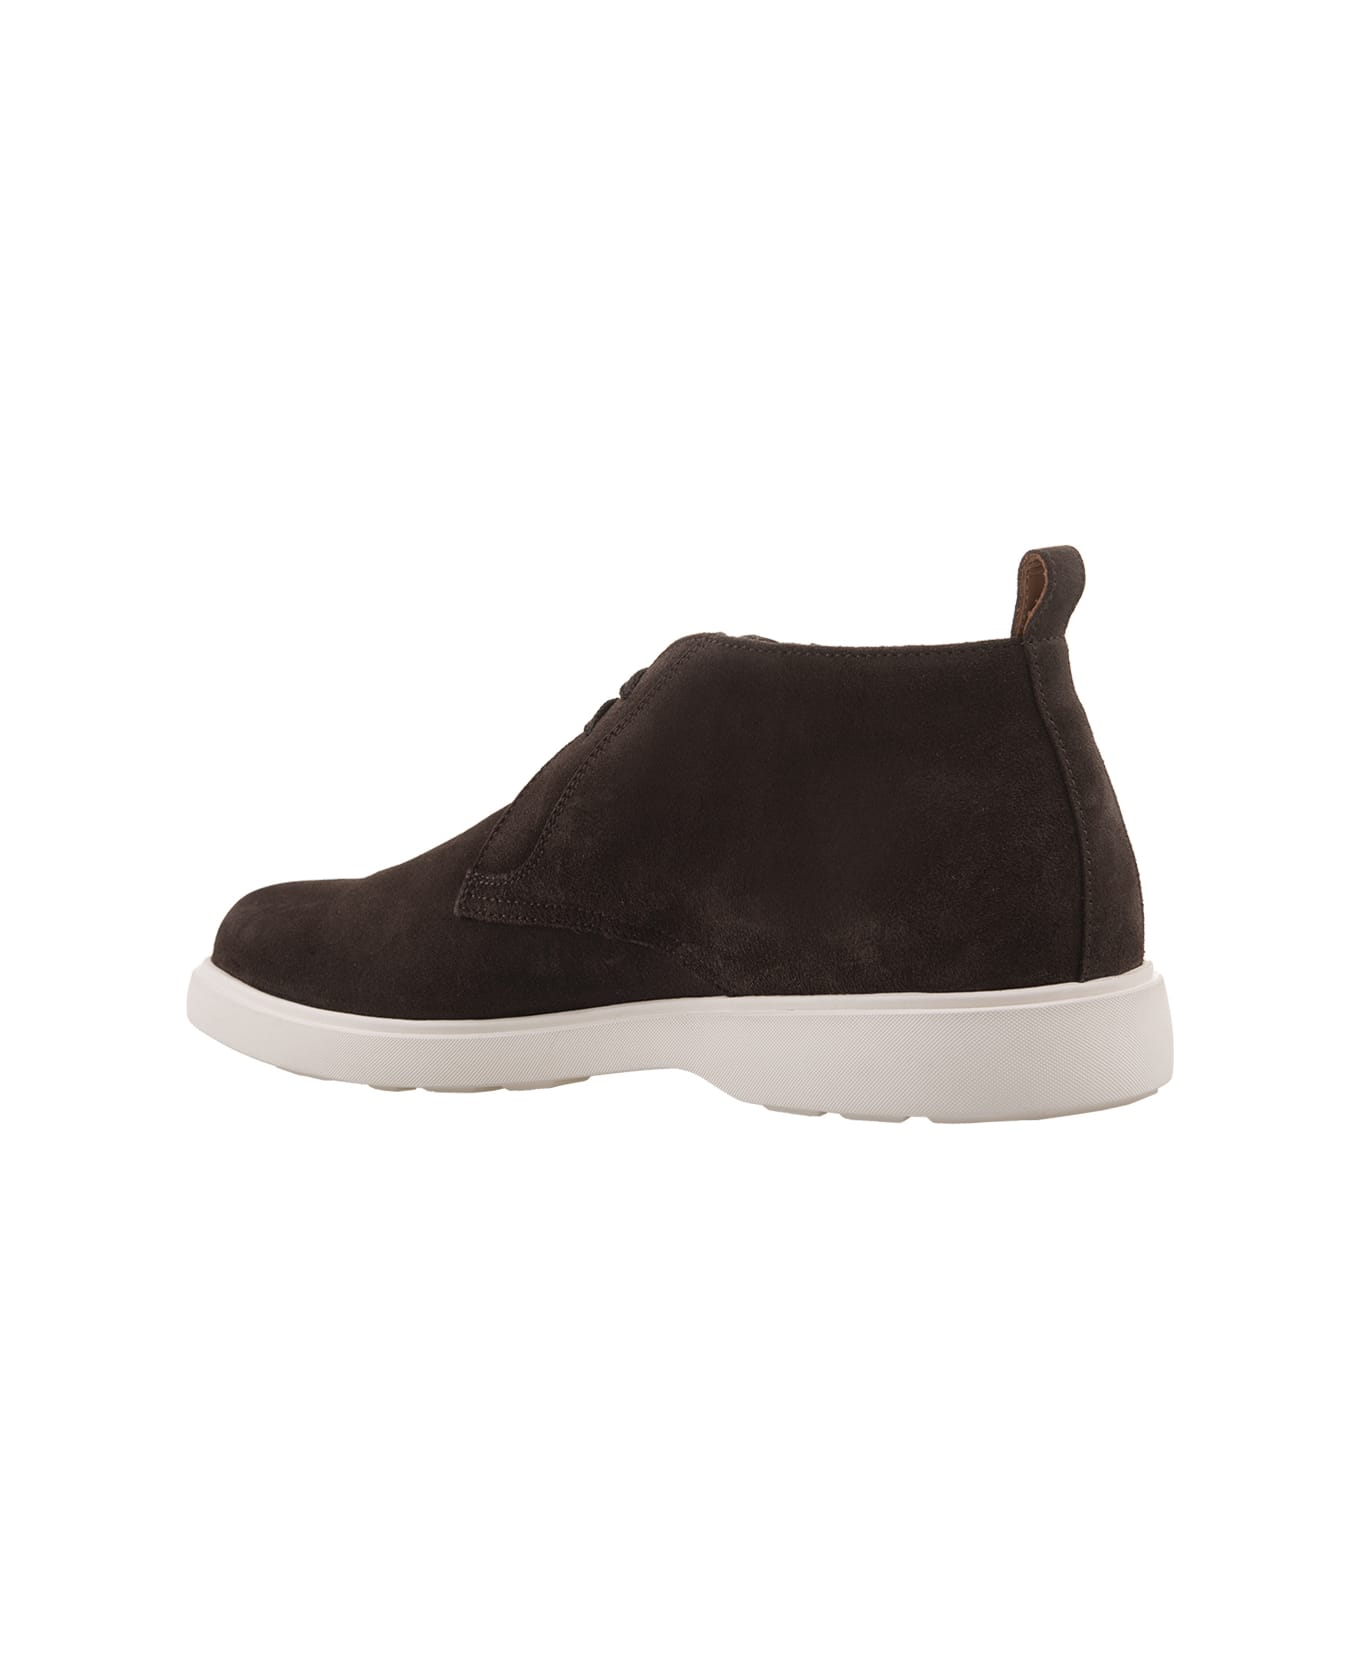 Kiton Brown Suede Laced Leather Ankle Boots - Brown